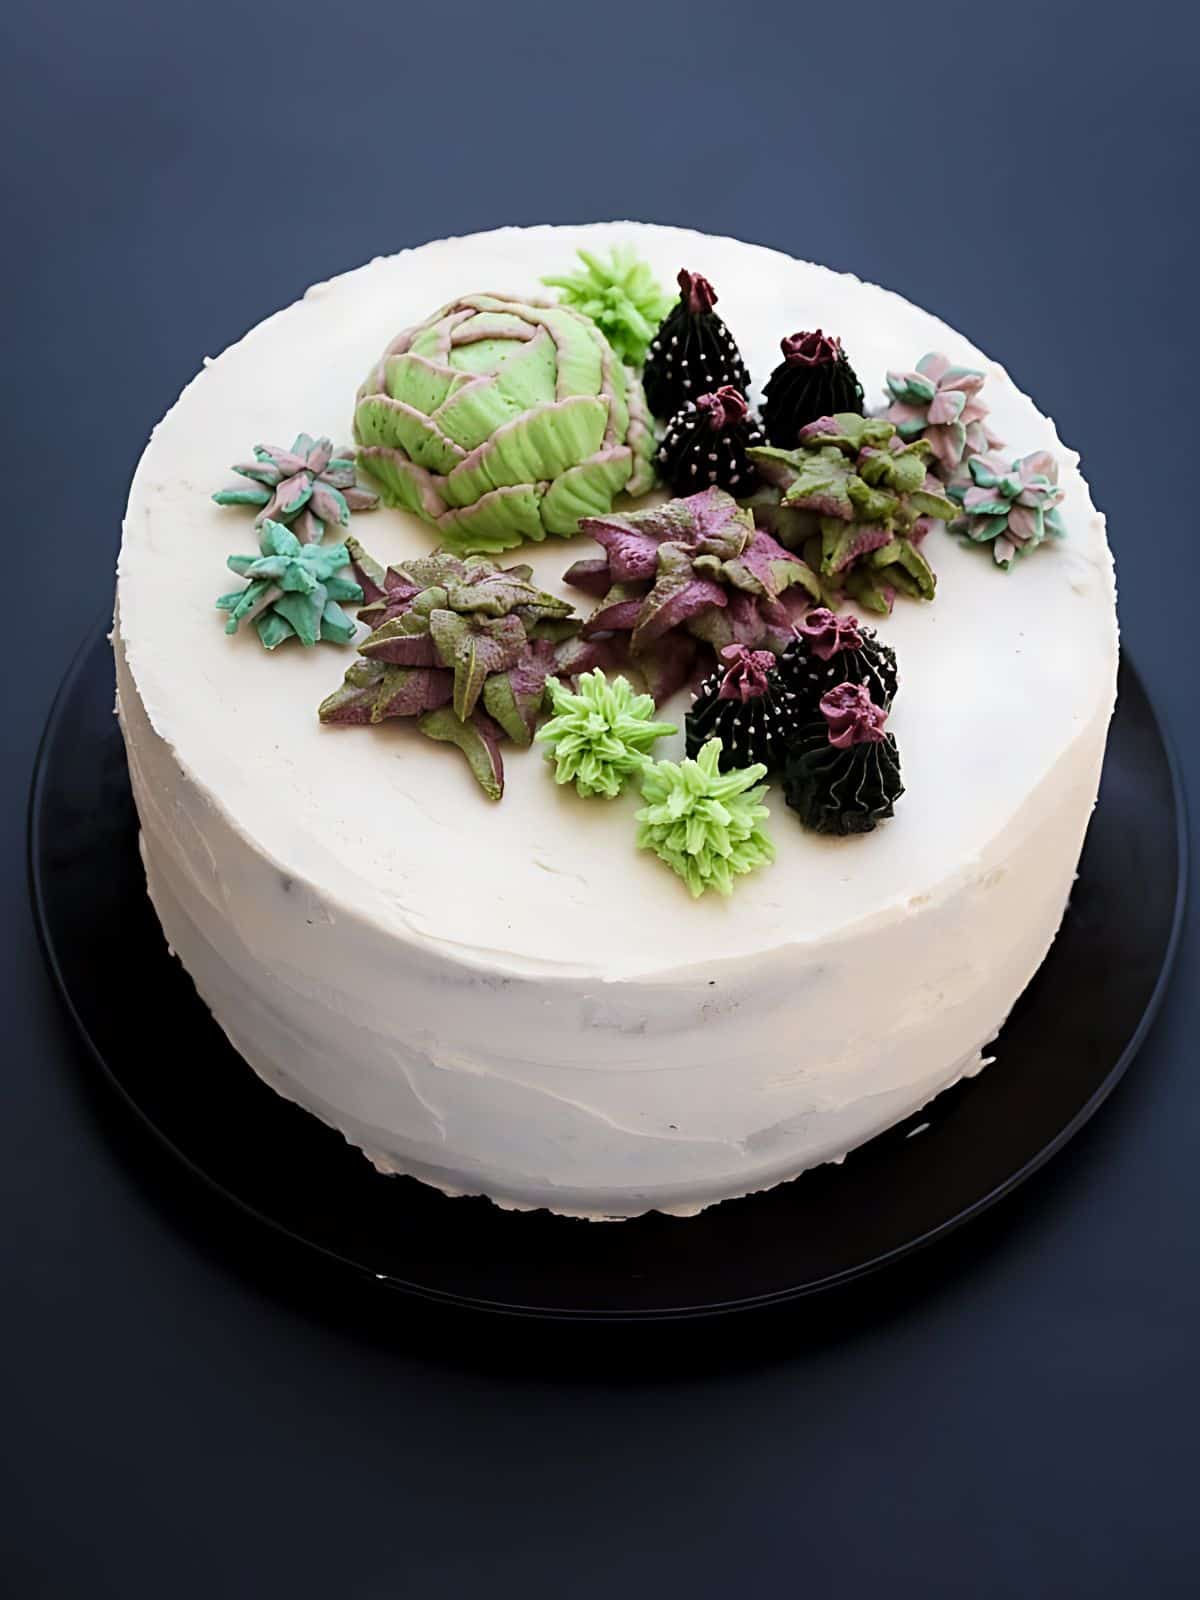 Peanut Butter Banana Succulent Cake topped with plant-like designed candies.